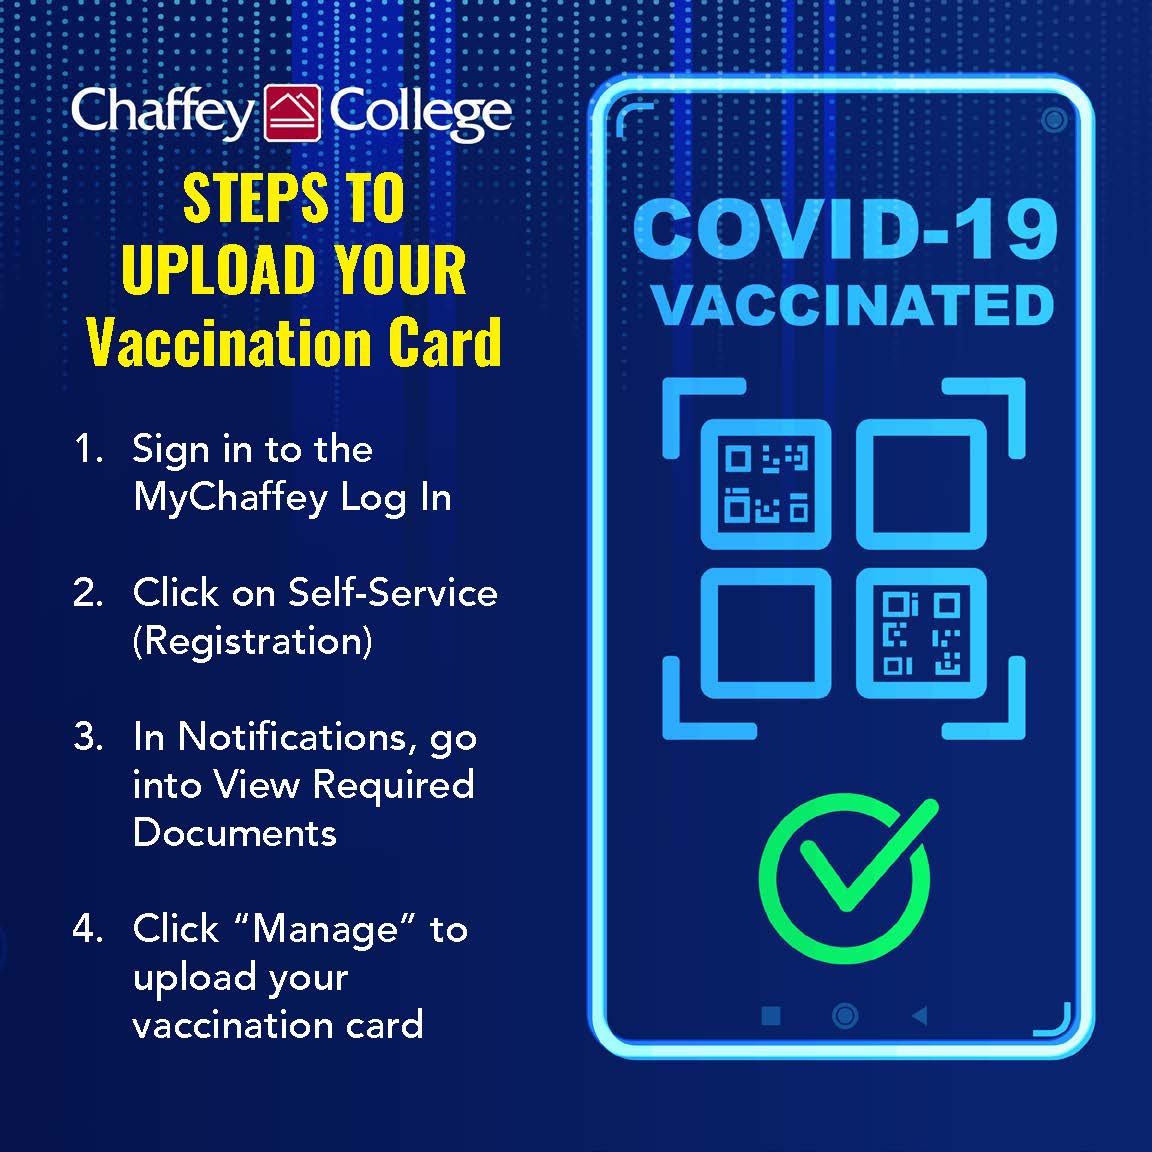 STEPS TO UPLOAD YOUR Vaccination Card